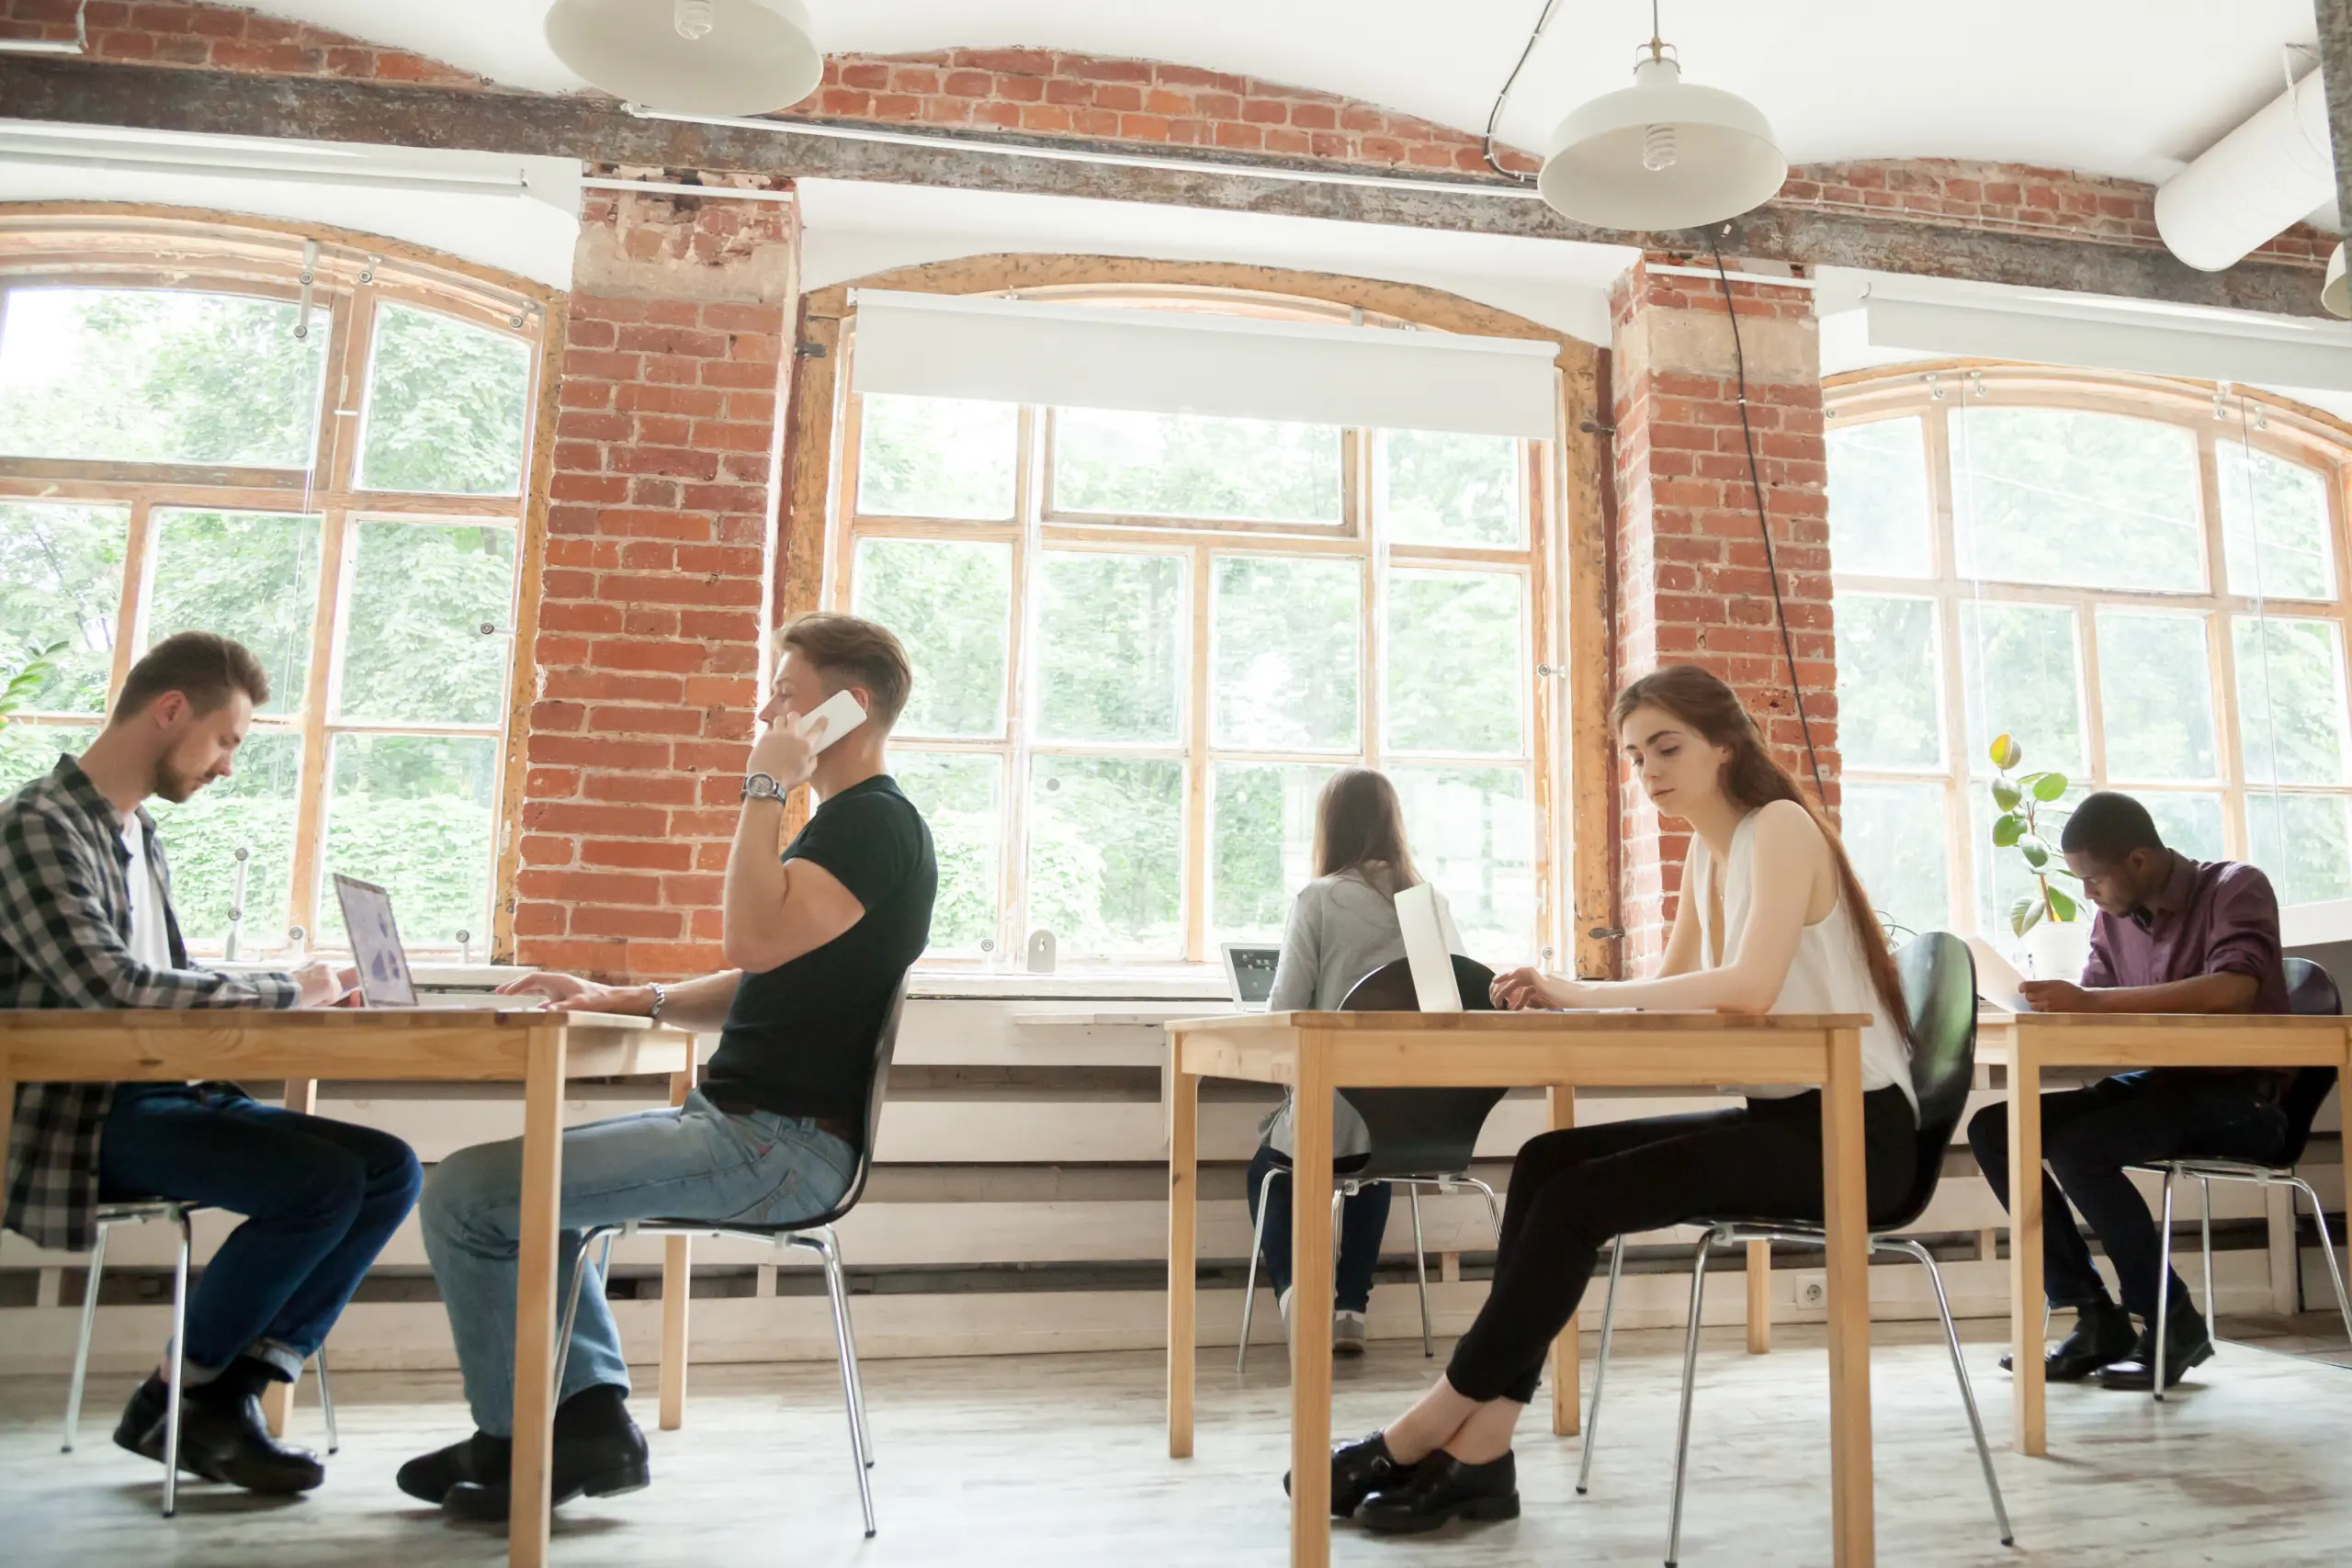 Co-working space concept, diverse people employees working in shared office together, multiracial business men and women sitting at desks using devices in modern loft new coworking interior